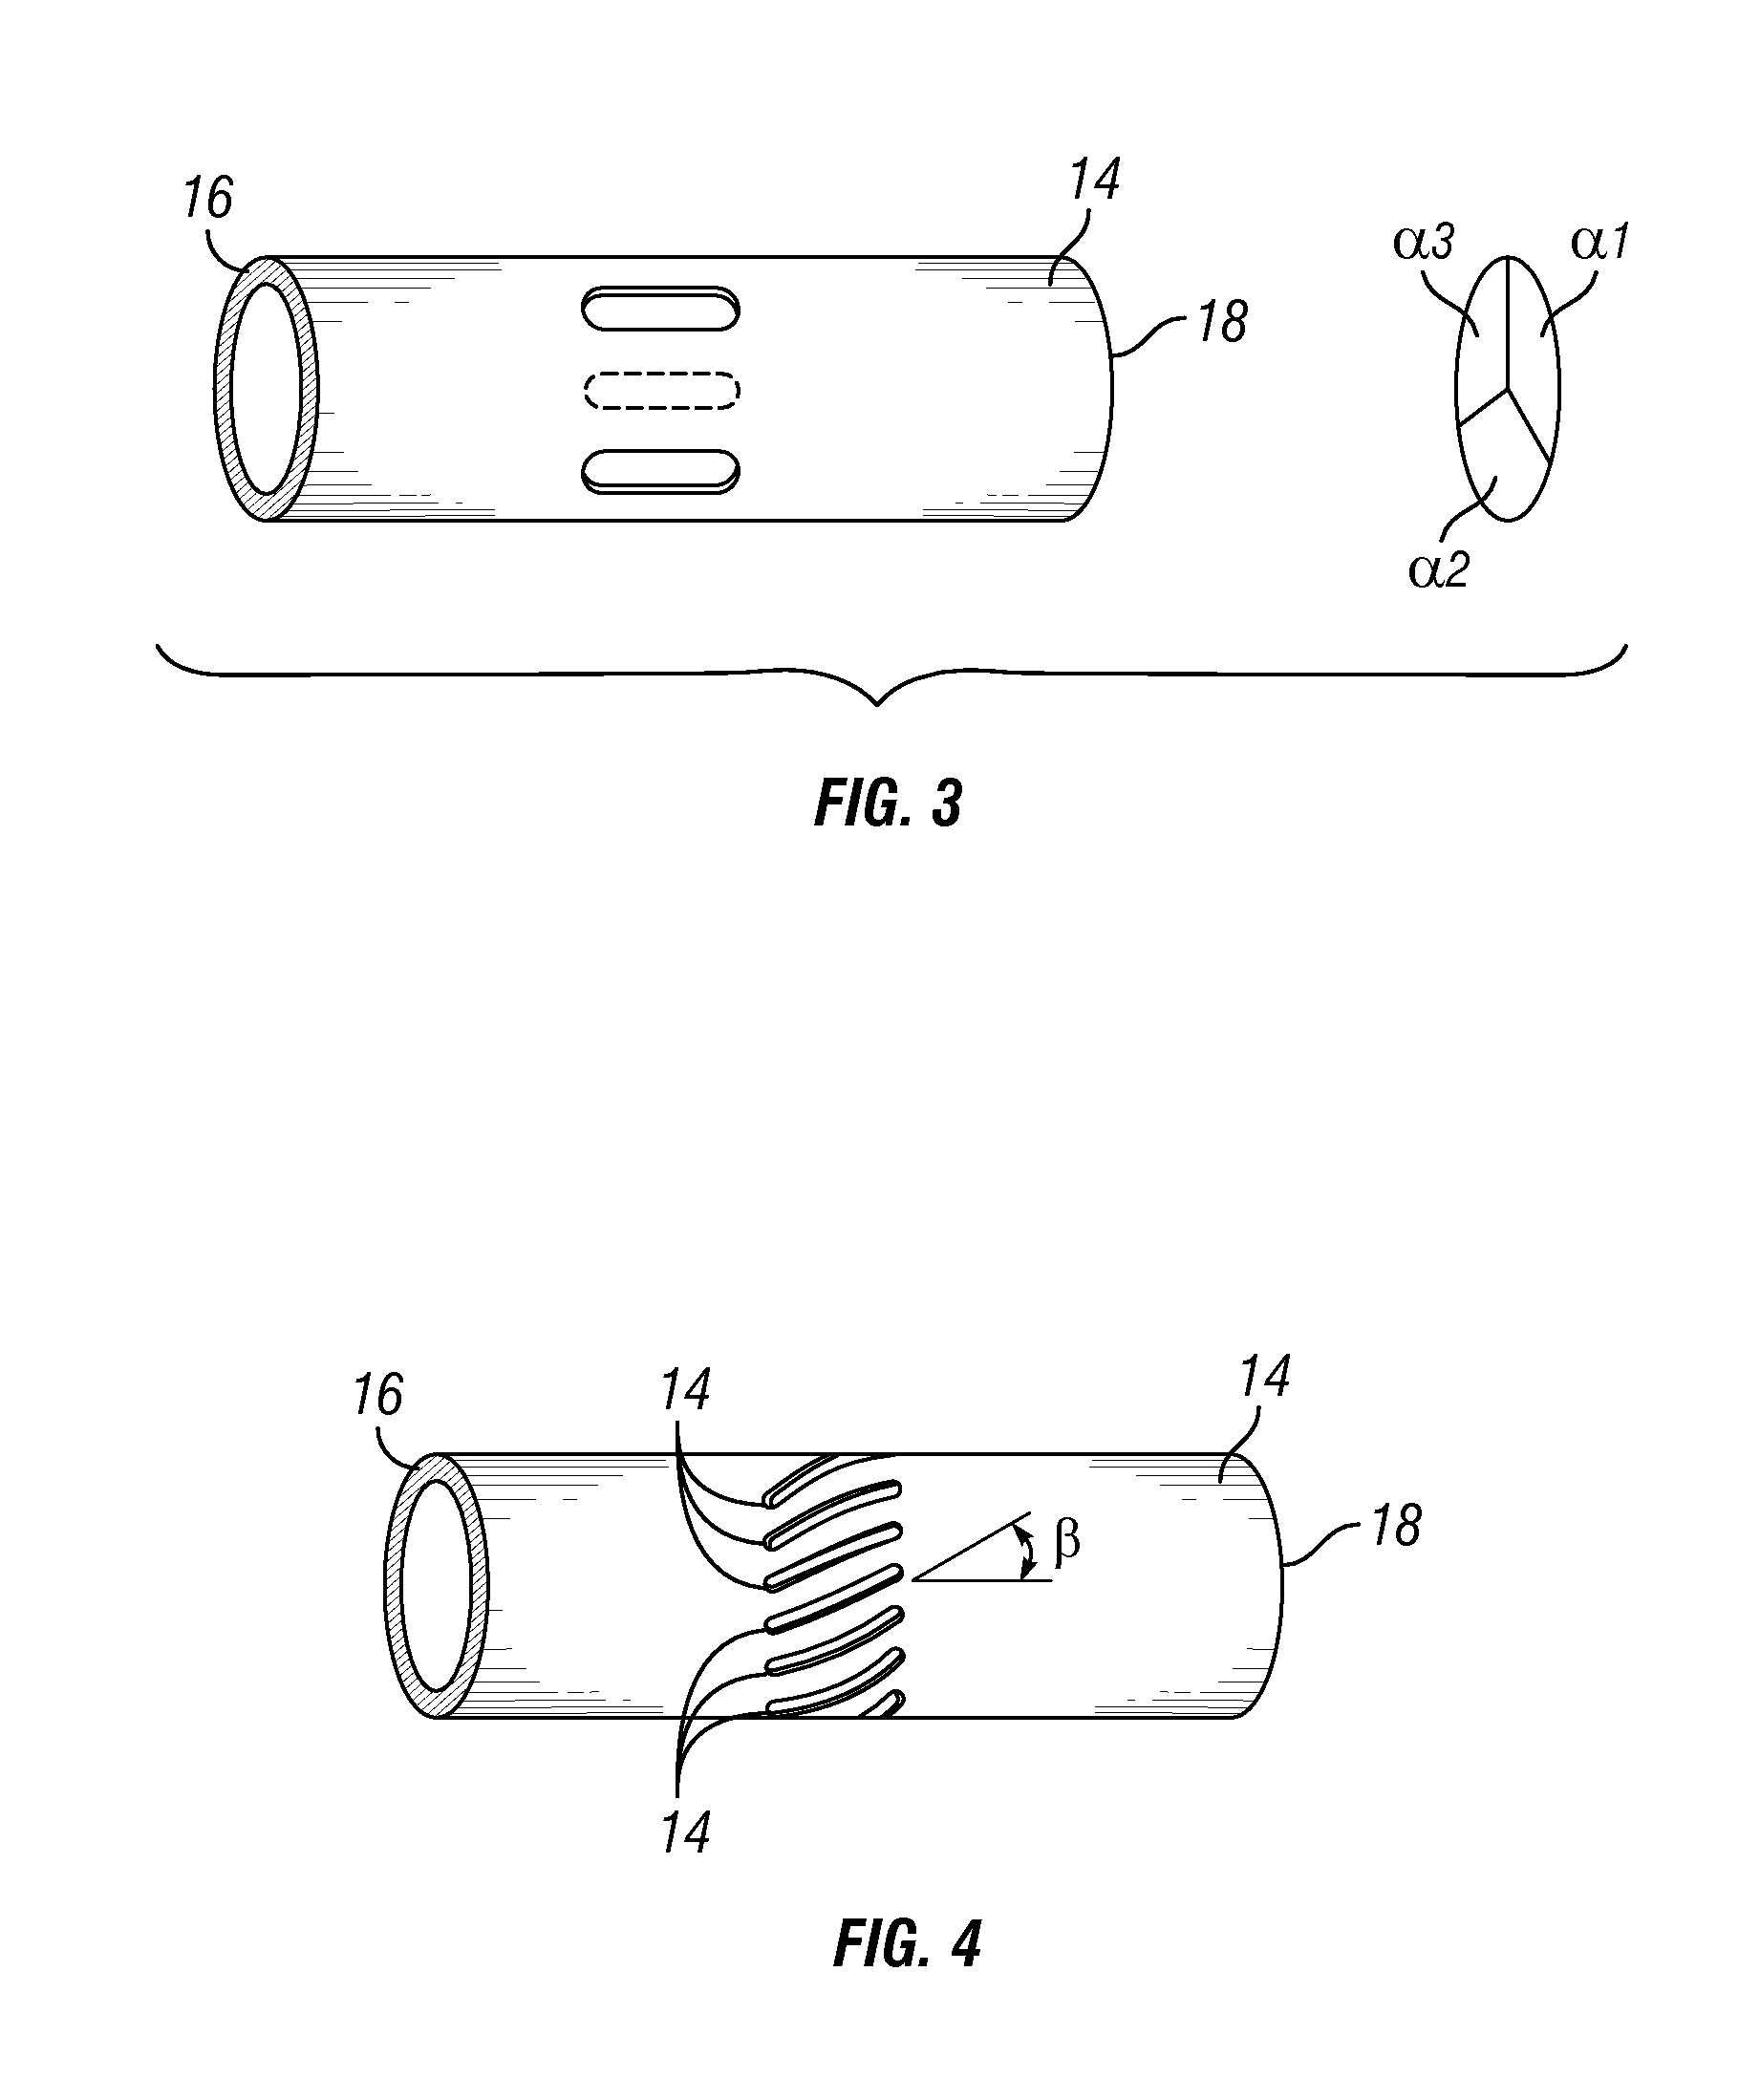 Methods of producing flow-through passages in casing, and methods of using such casing